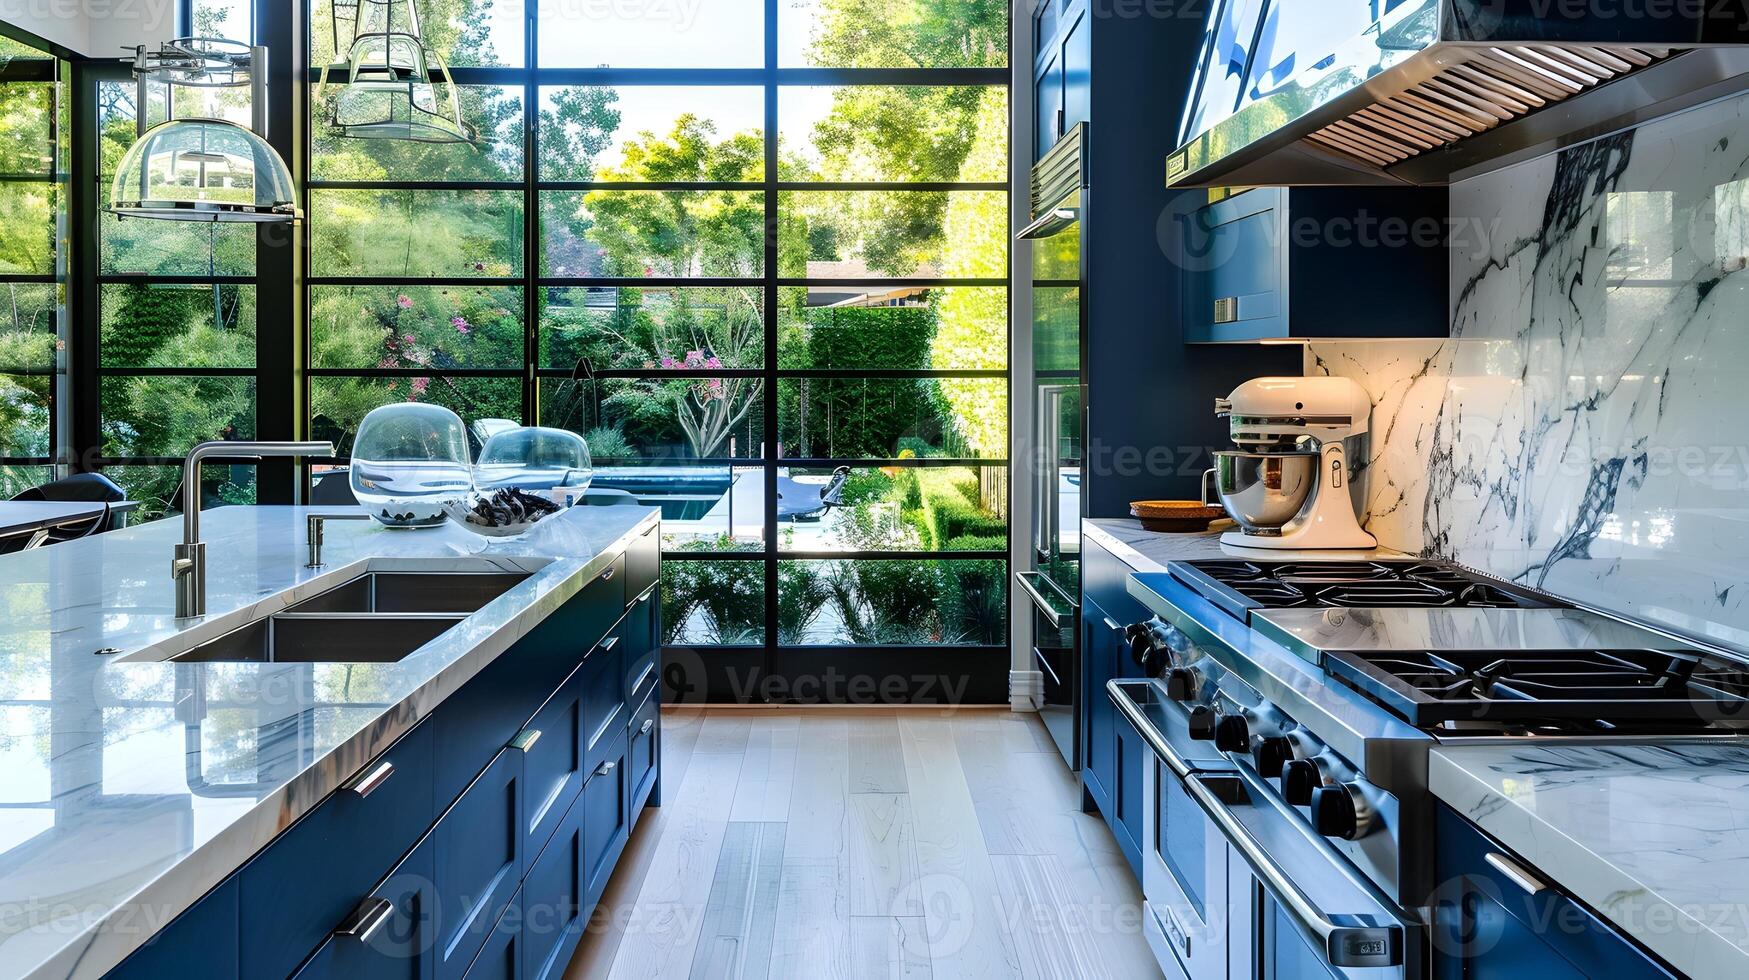 Elegant Los Angeles Home Kitchen with Dark Blue Cabinets and Marble Countertops overlooking a Beautiful Backyard photo